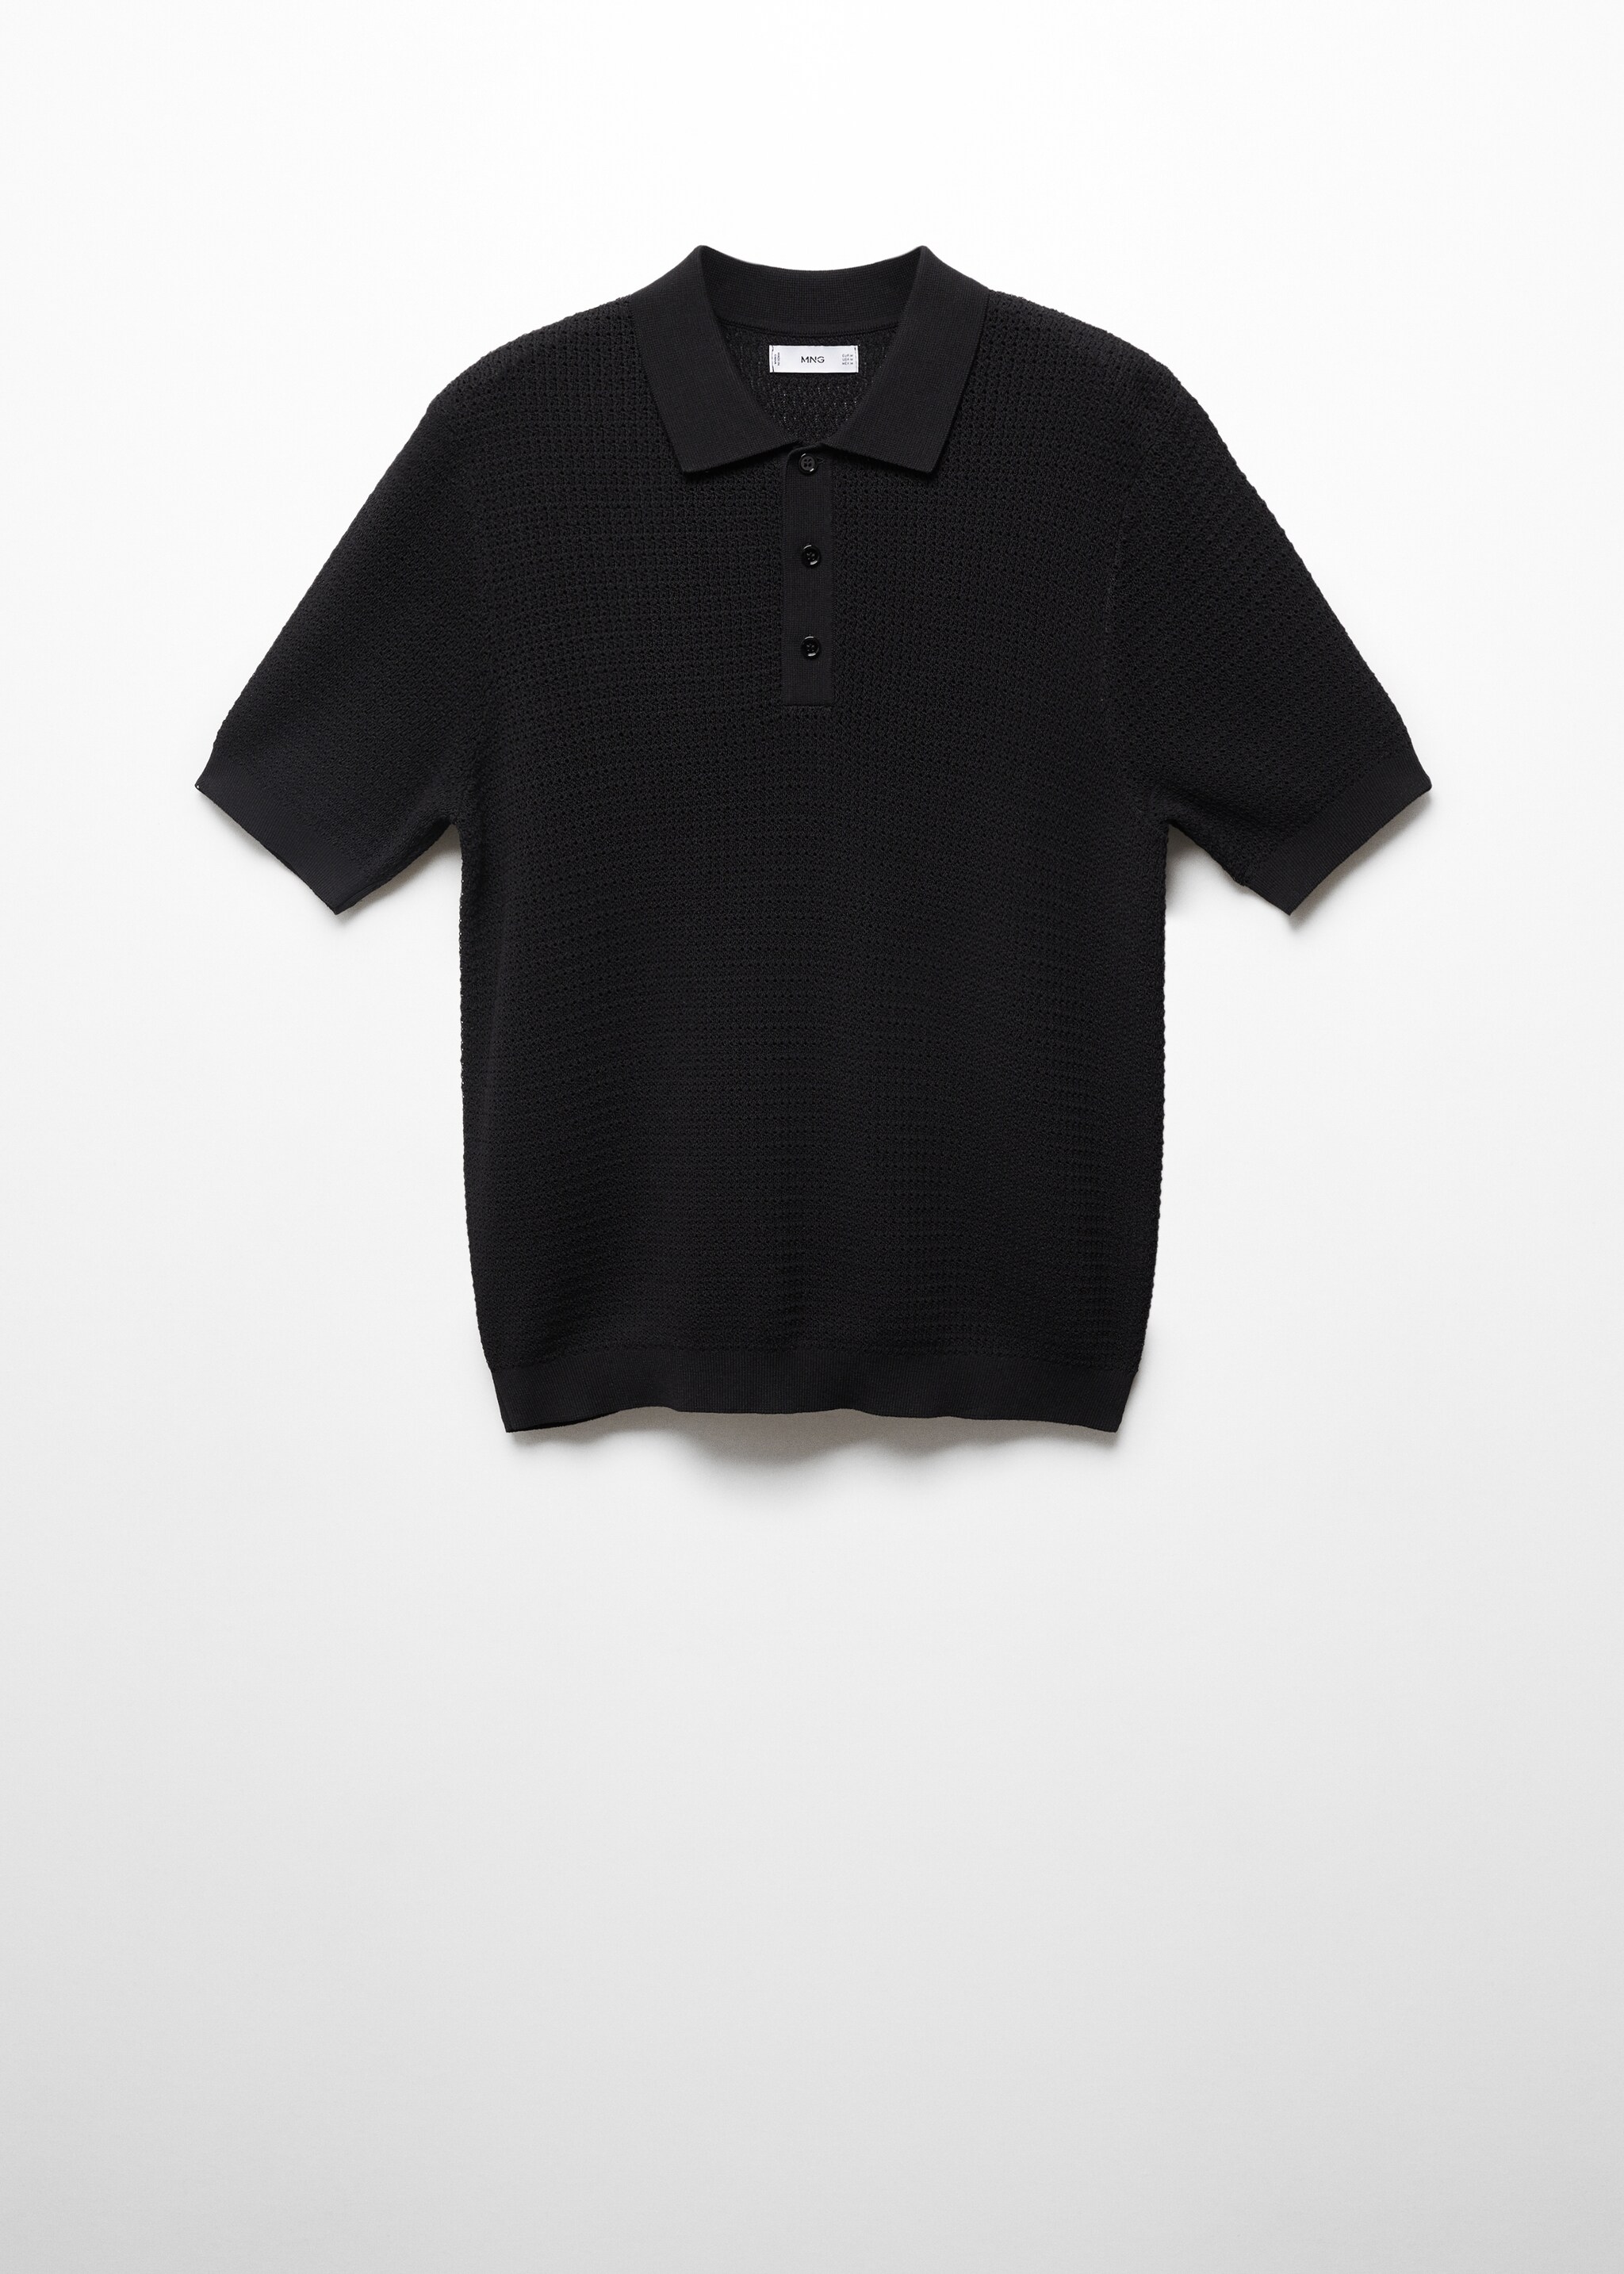 Openwork knit polo - Article without model